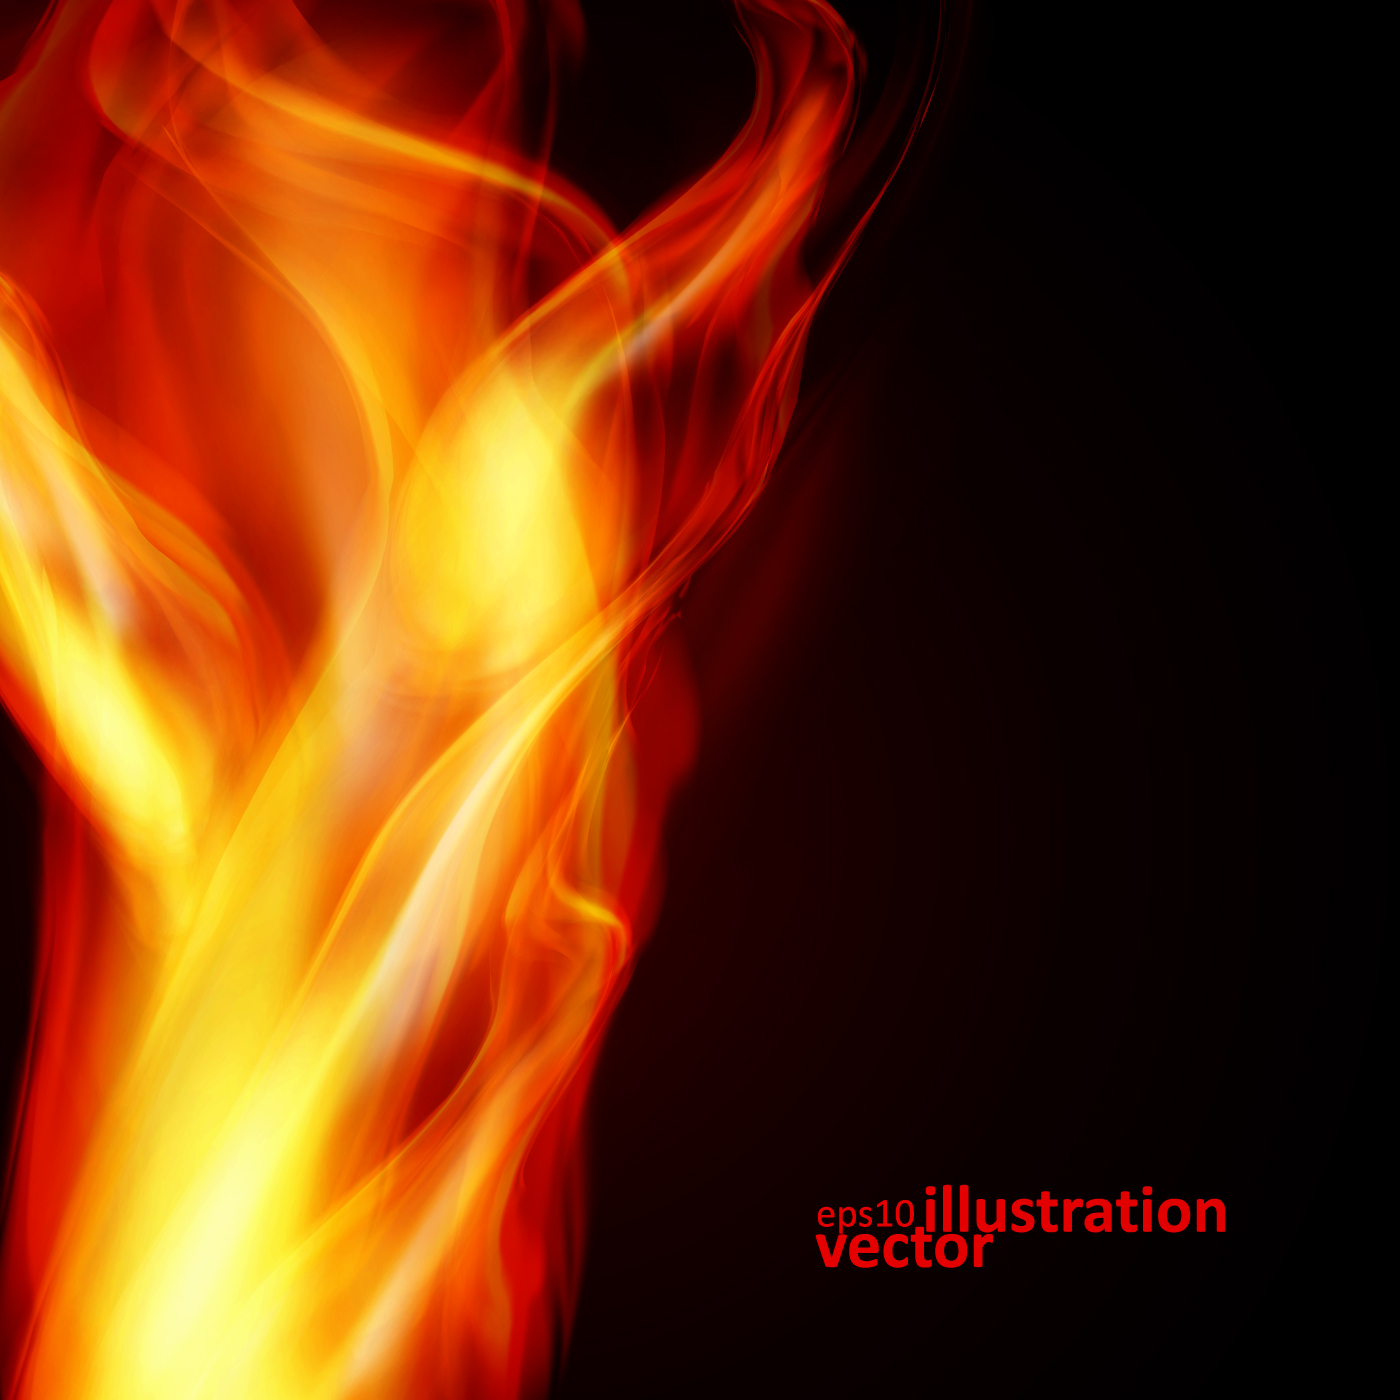 Realistic Fiery Background Illustration Vector